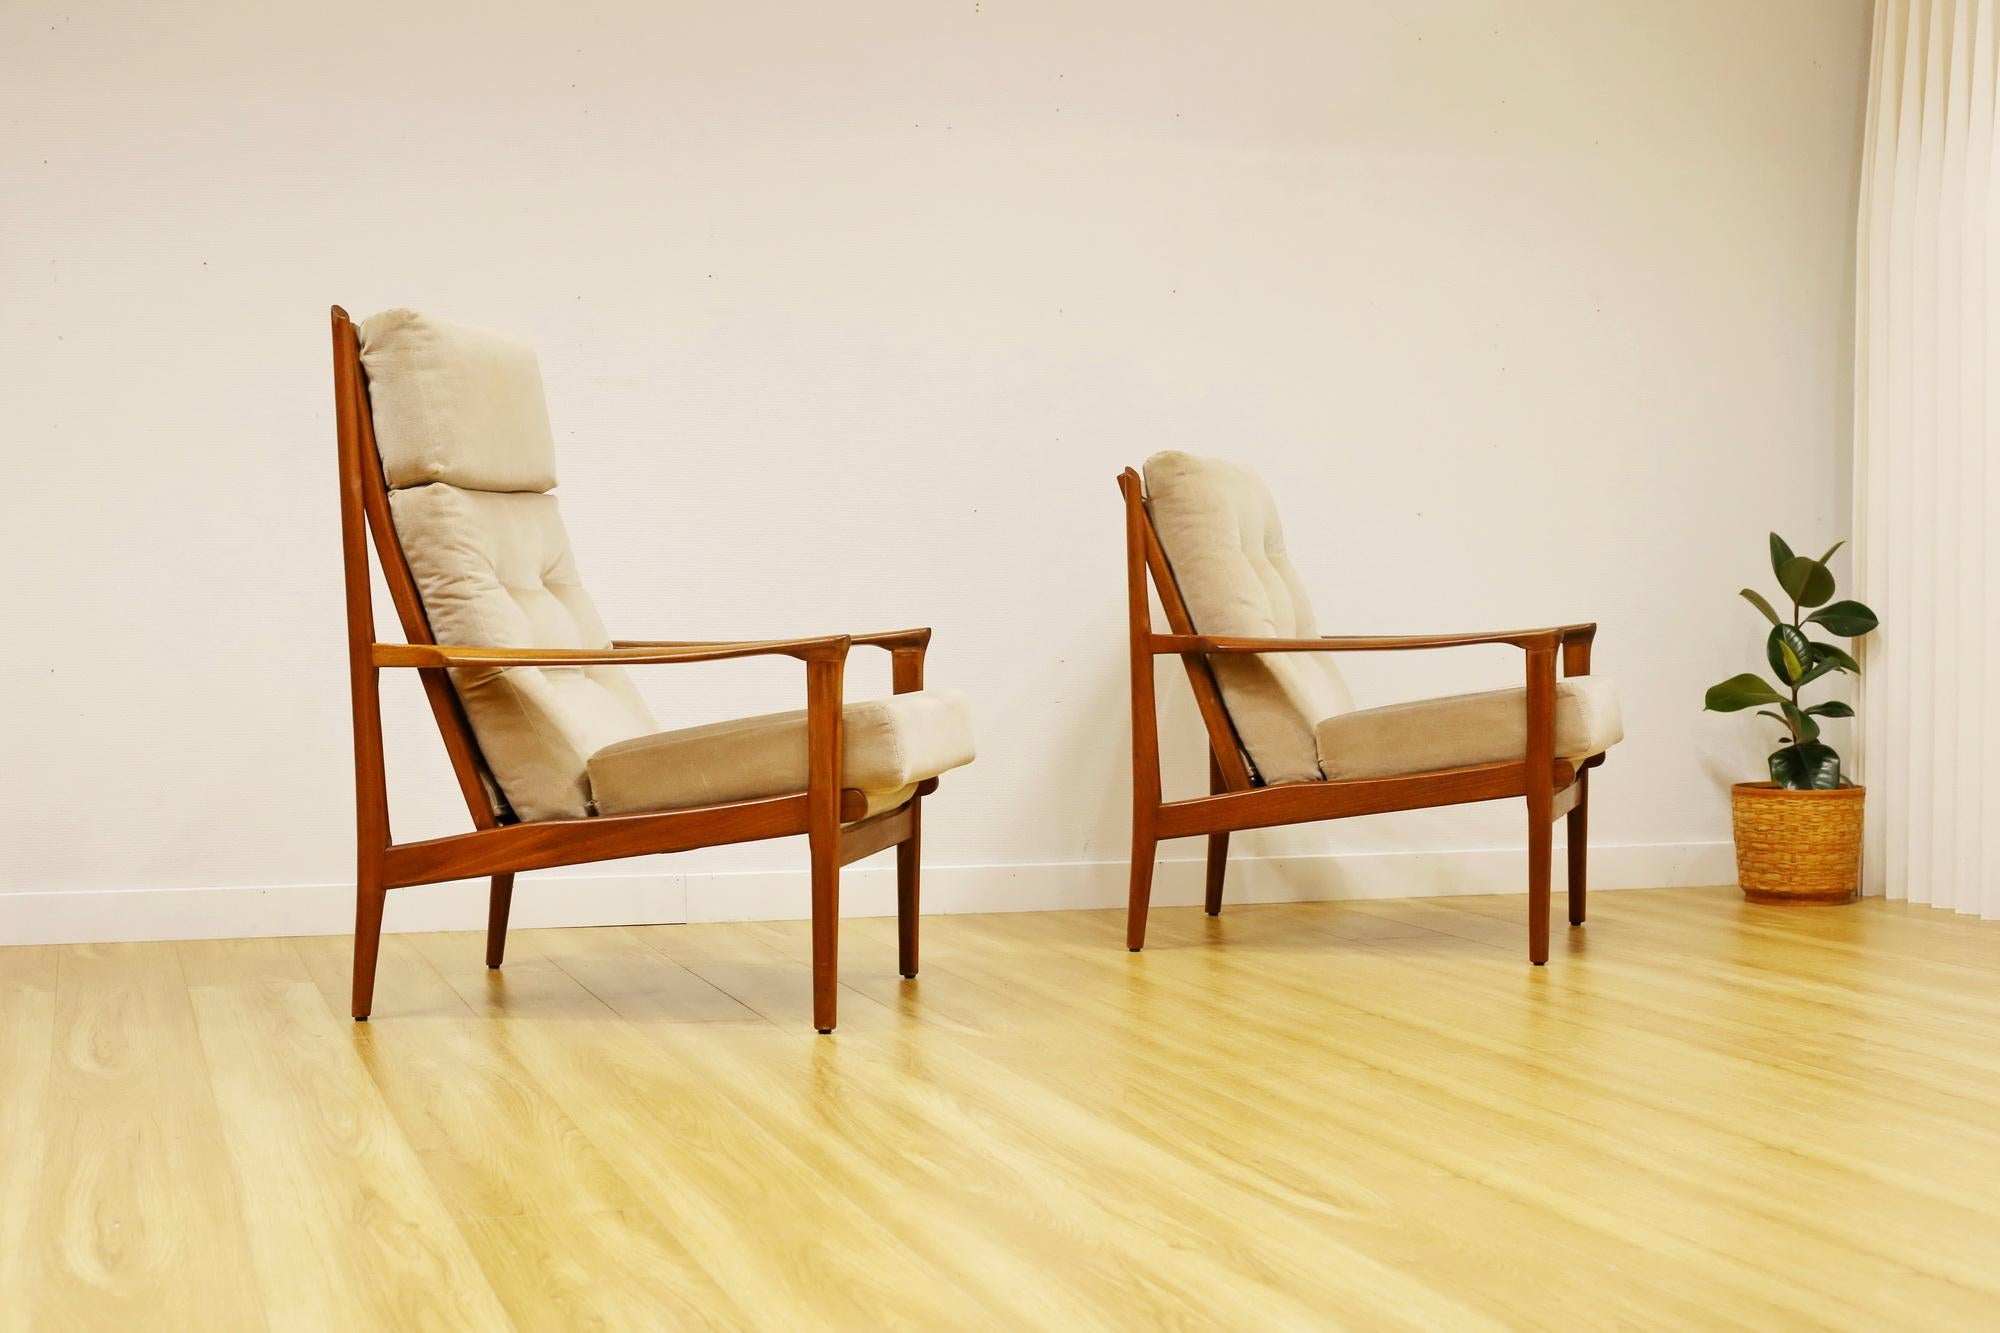 A Pair  [FLER] 'KARINGA'  armchairs in good original condtion.

[Mathcing Daybed for auction too, pls see my other listings.]

Beautifully sculpted mahogany frame is strong, no wobbly.

Upholstery about 10 years old, still in OK condition. But pls